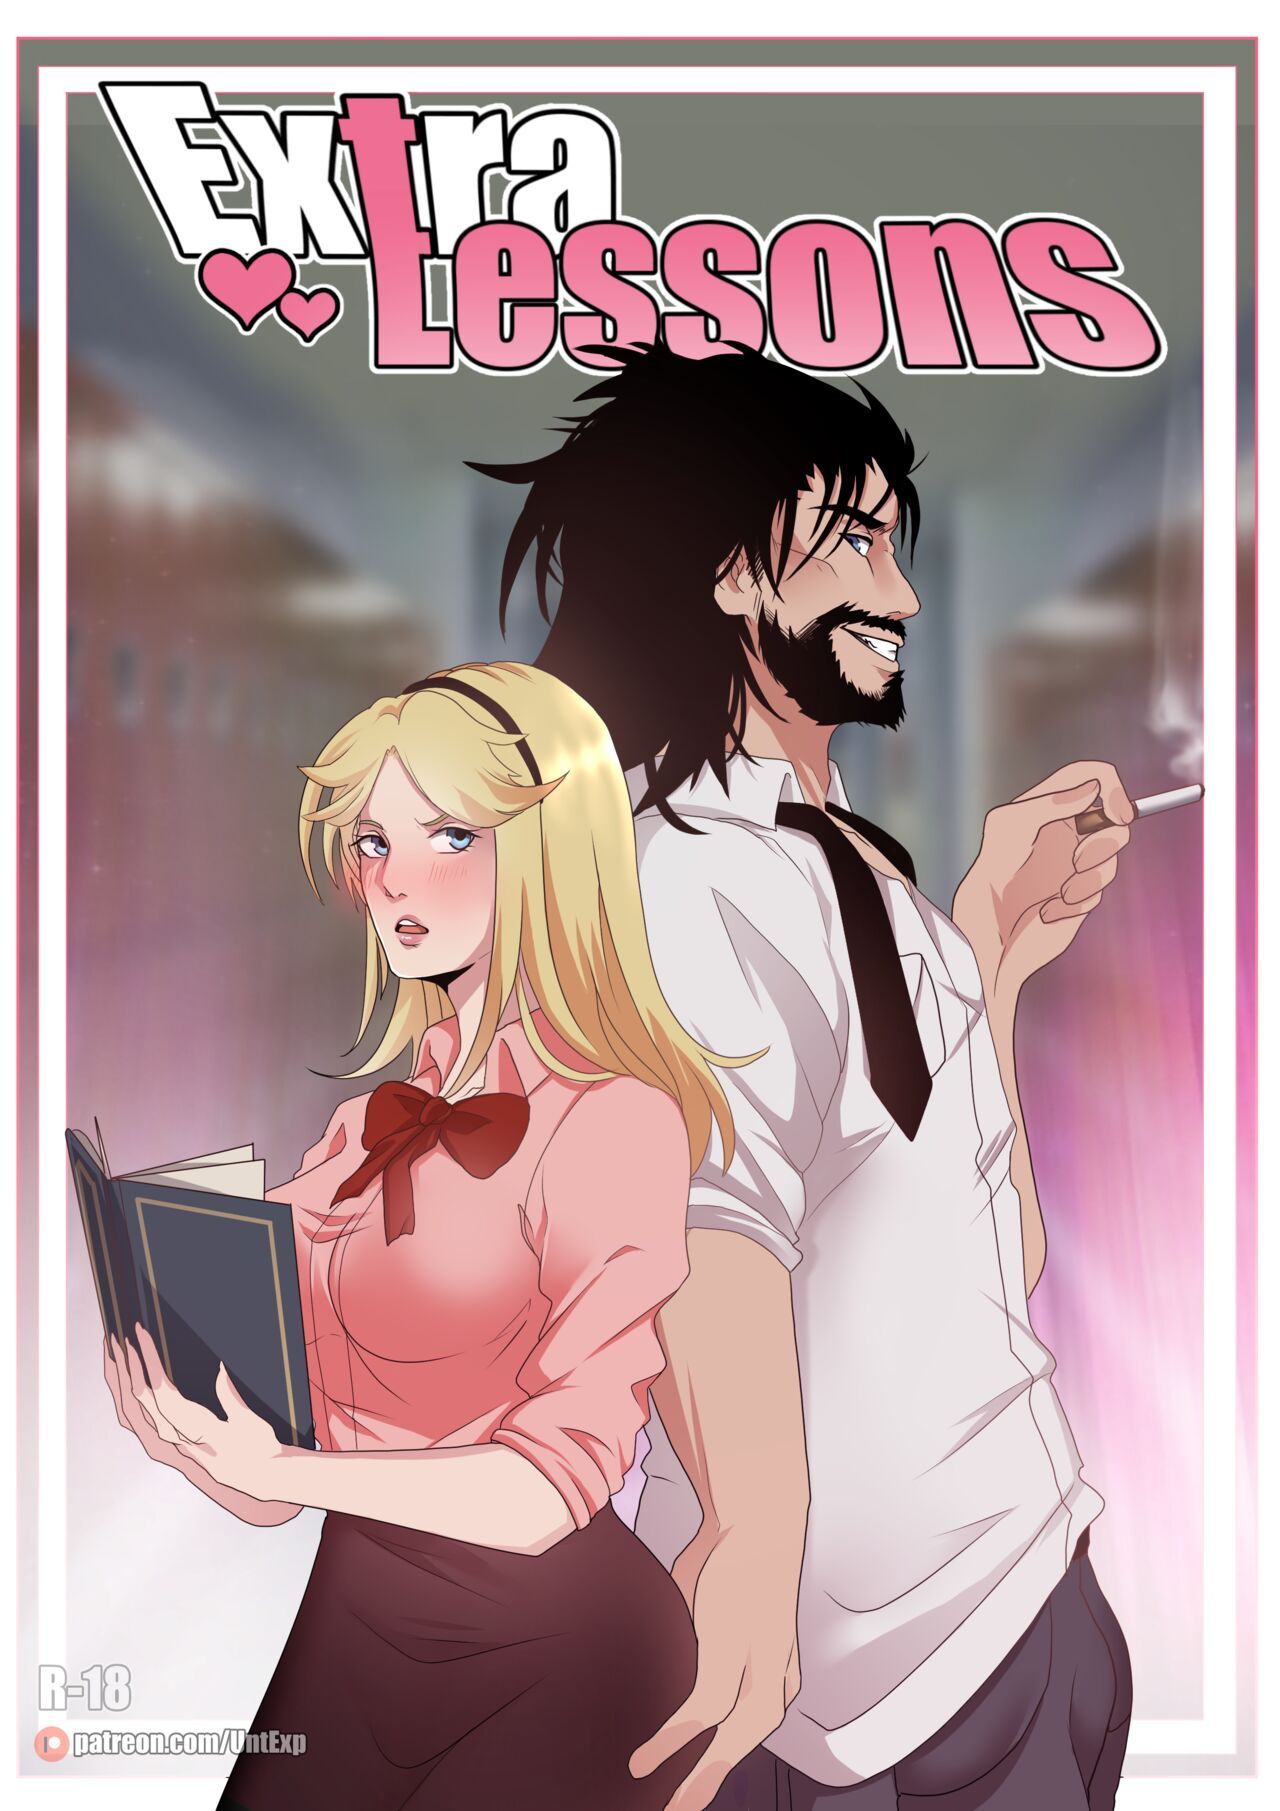  Extra Lessons Porn Comic english 01